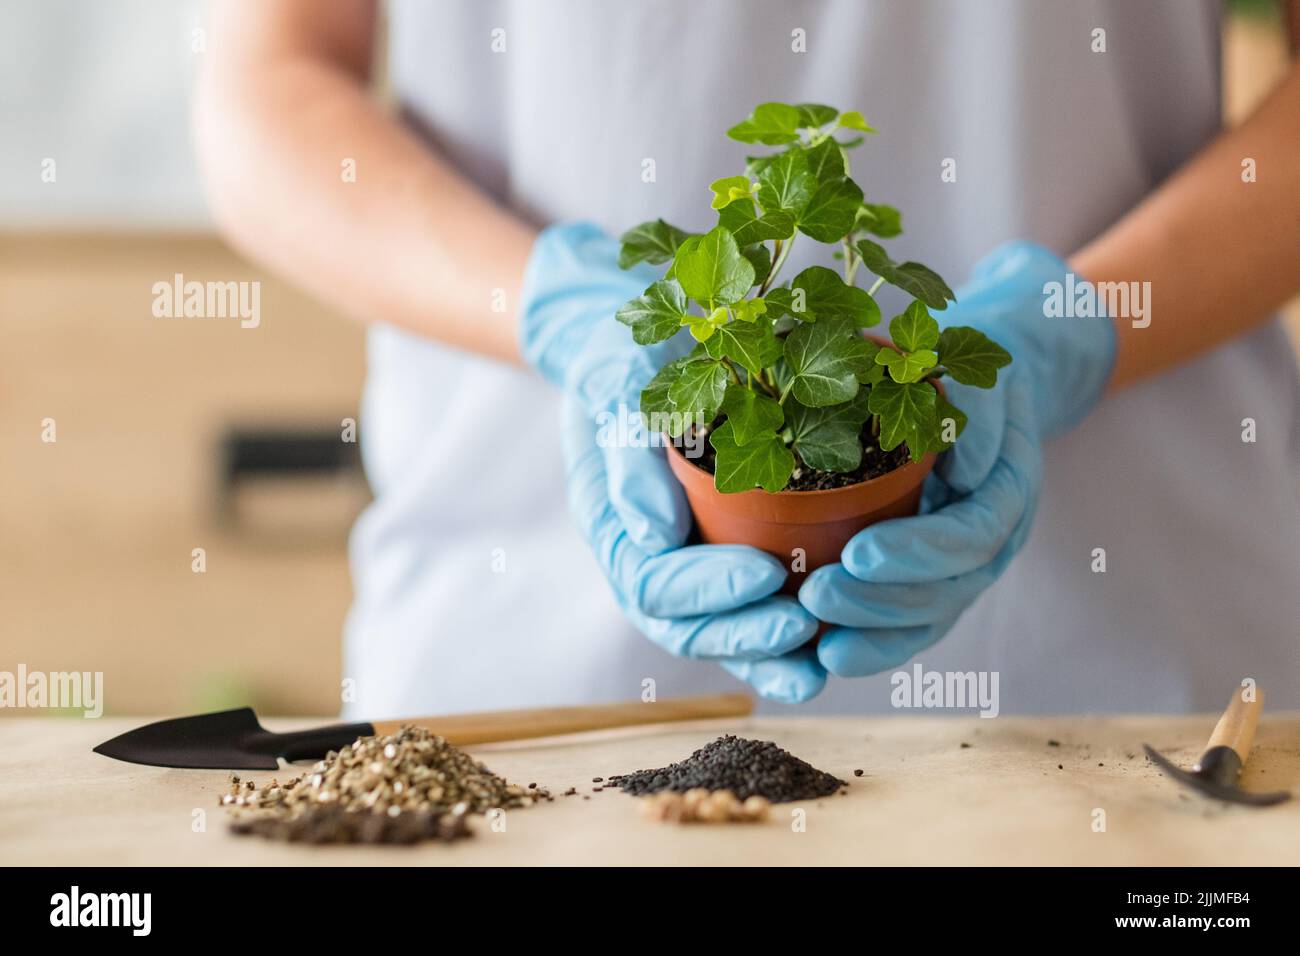 planting repotting services houseplant shopping Stock Photo